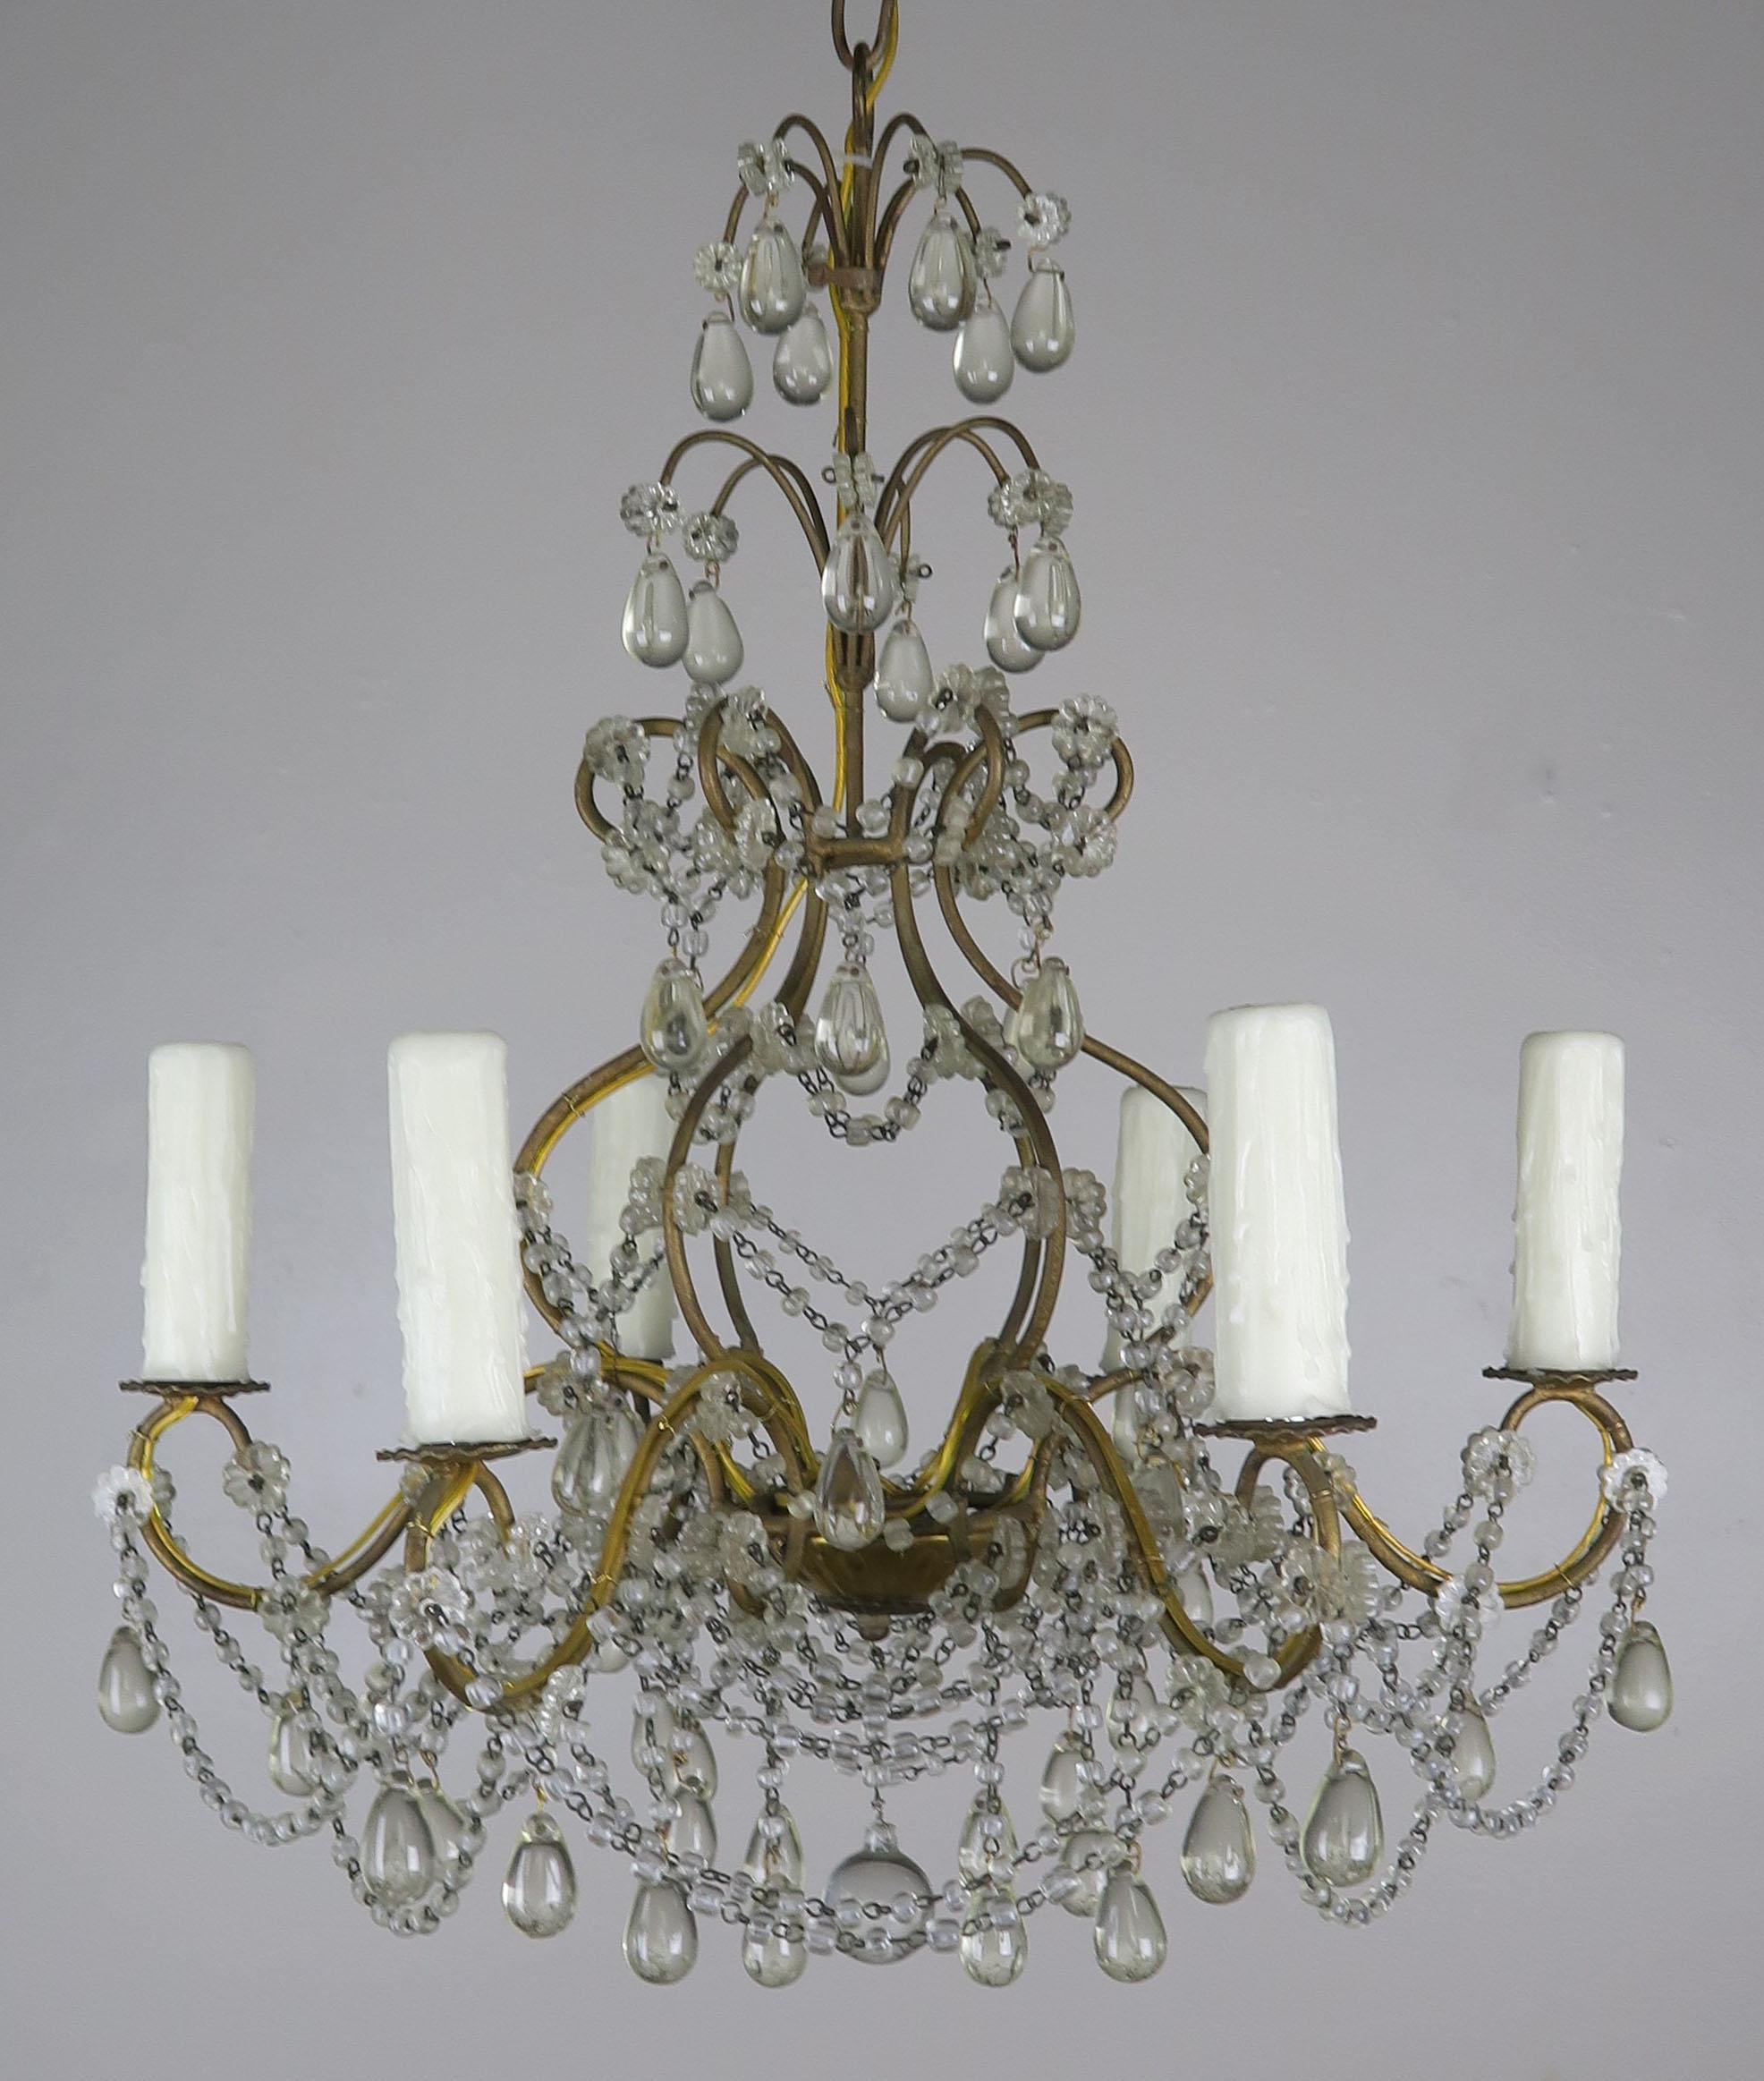 (6) light Italian gilt metal framed chandelier adorned with garlands of macaroni beads and tear shaped drops. The fixture is newly rewired with cream colored drip wax candle covers. Includes chain and canopy.